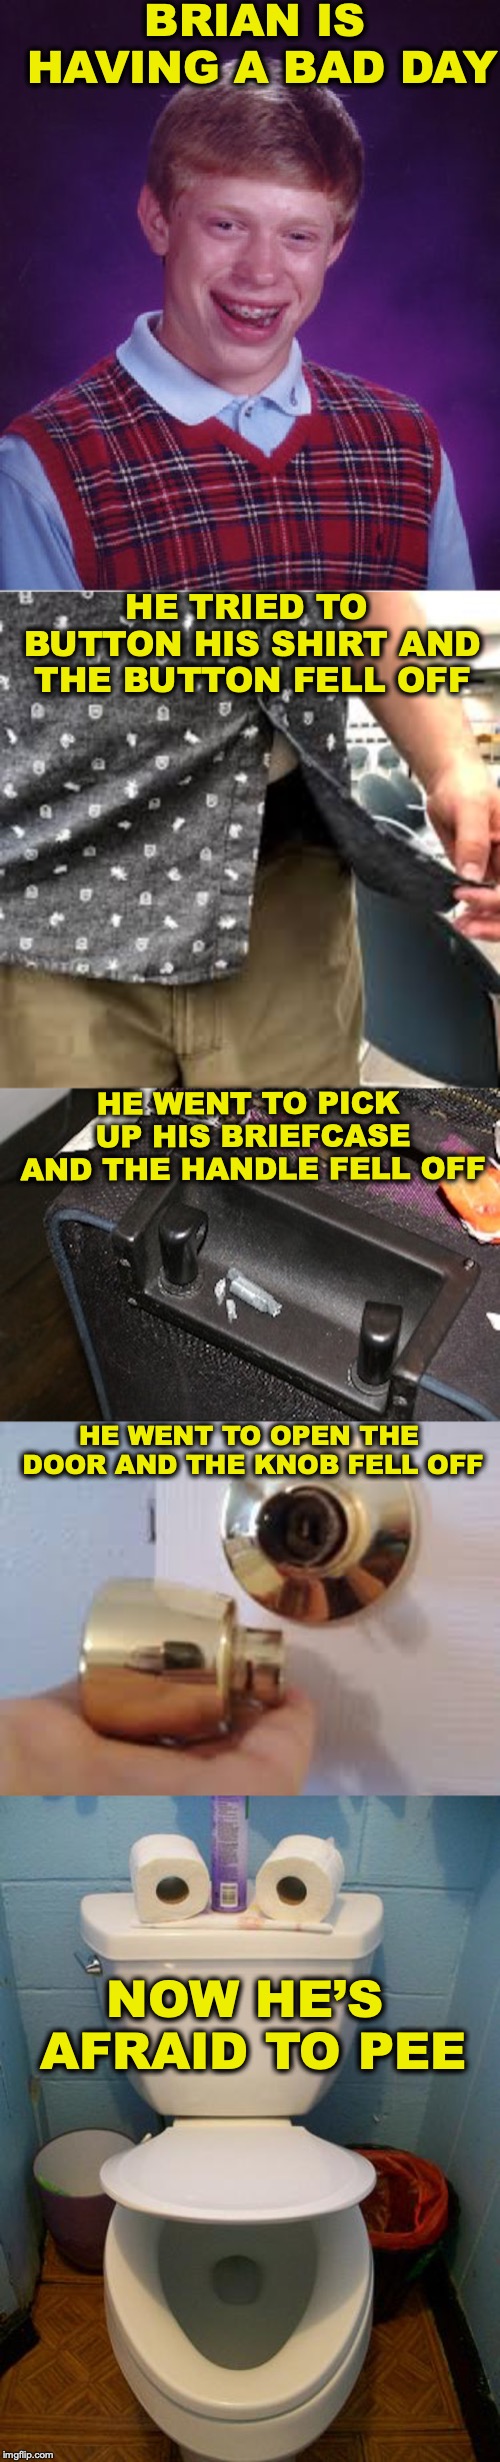 When Your Fate Is In Your Hands | BRIAN IS HAVING A BAD DAY; HE TRIED TO BUTTON HIS SHIRT AND THE BUTTON FELL OFF; HE WENT TO PICK UP HIS BRIEFCASE AND THE HANDLE FELL OFF; HE WENT TO OPEN THE DOOR AND THE KNOB FELL OFF; NOW HE’S AFRAID TO PEE | image tagged in memes,bad luck brian,toilet humor,accidents | made w/ Imgflip meme maker